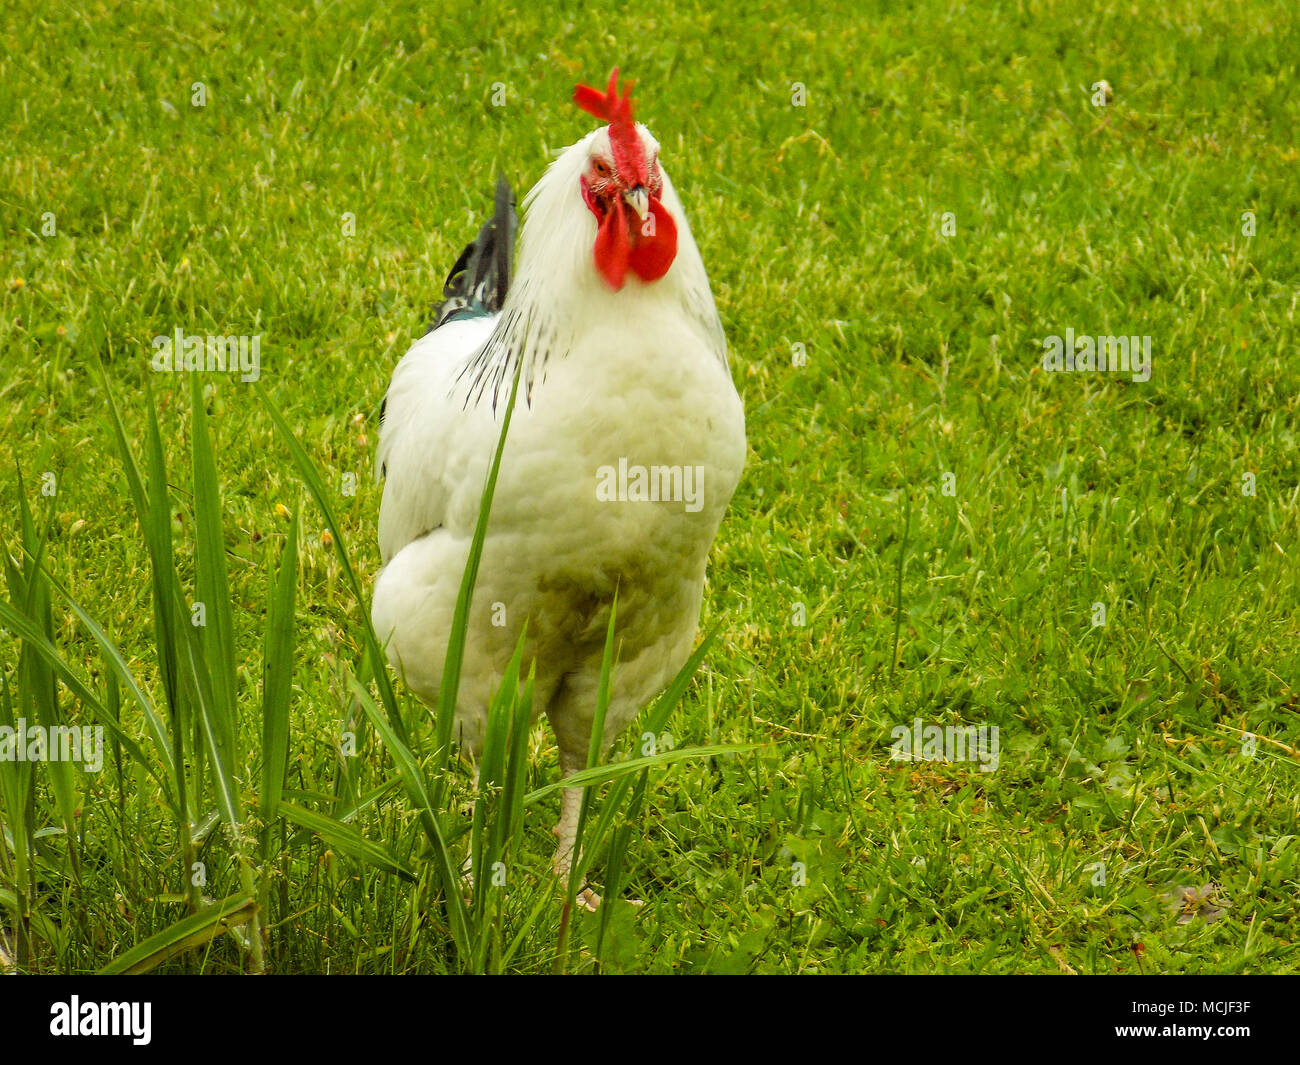 Hen and domestic breeding rooster. Stock Photo